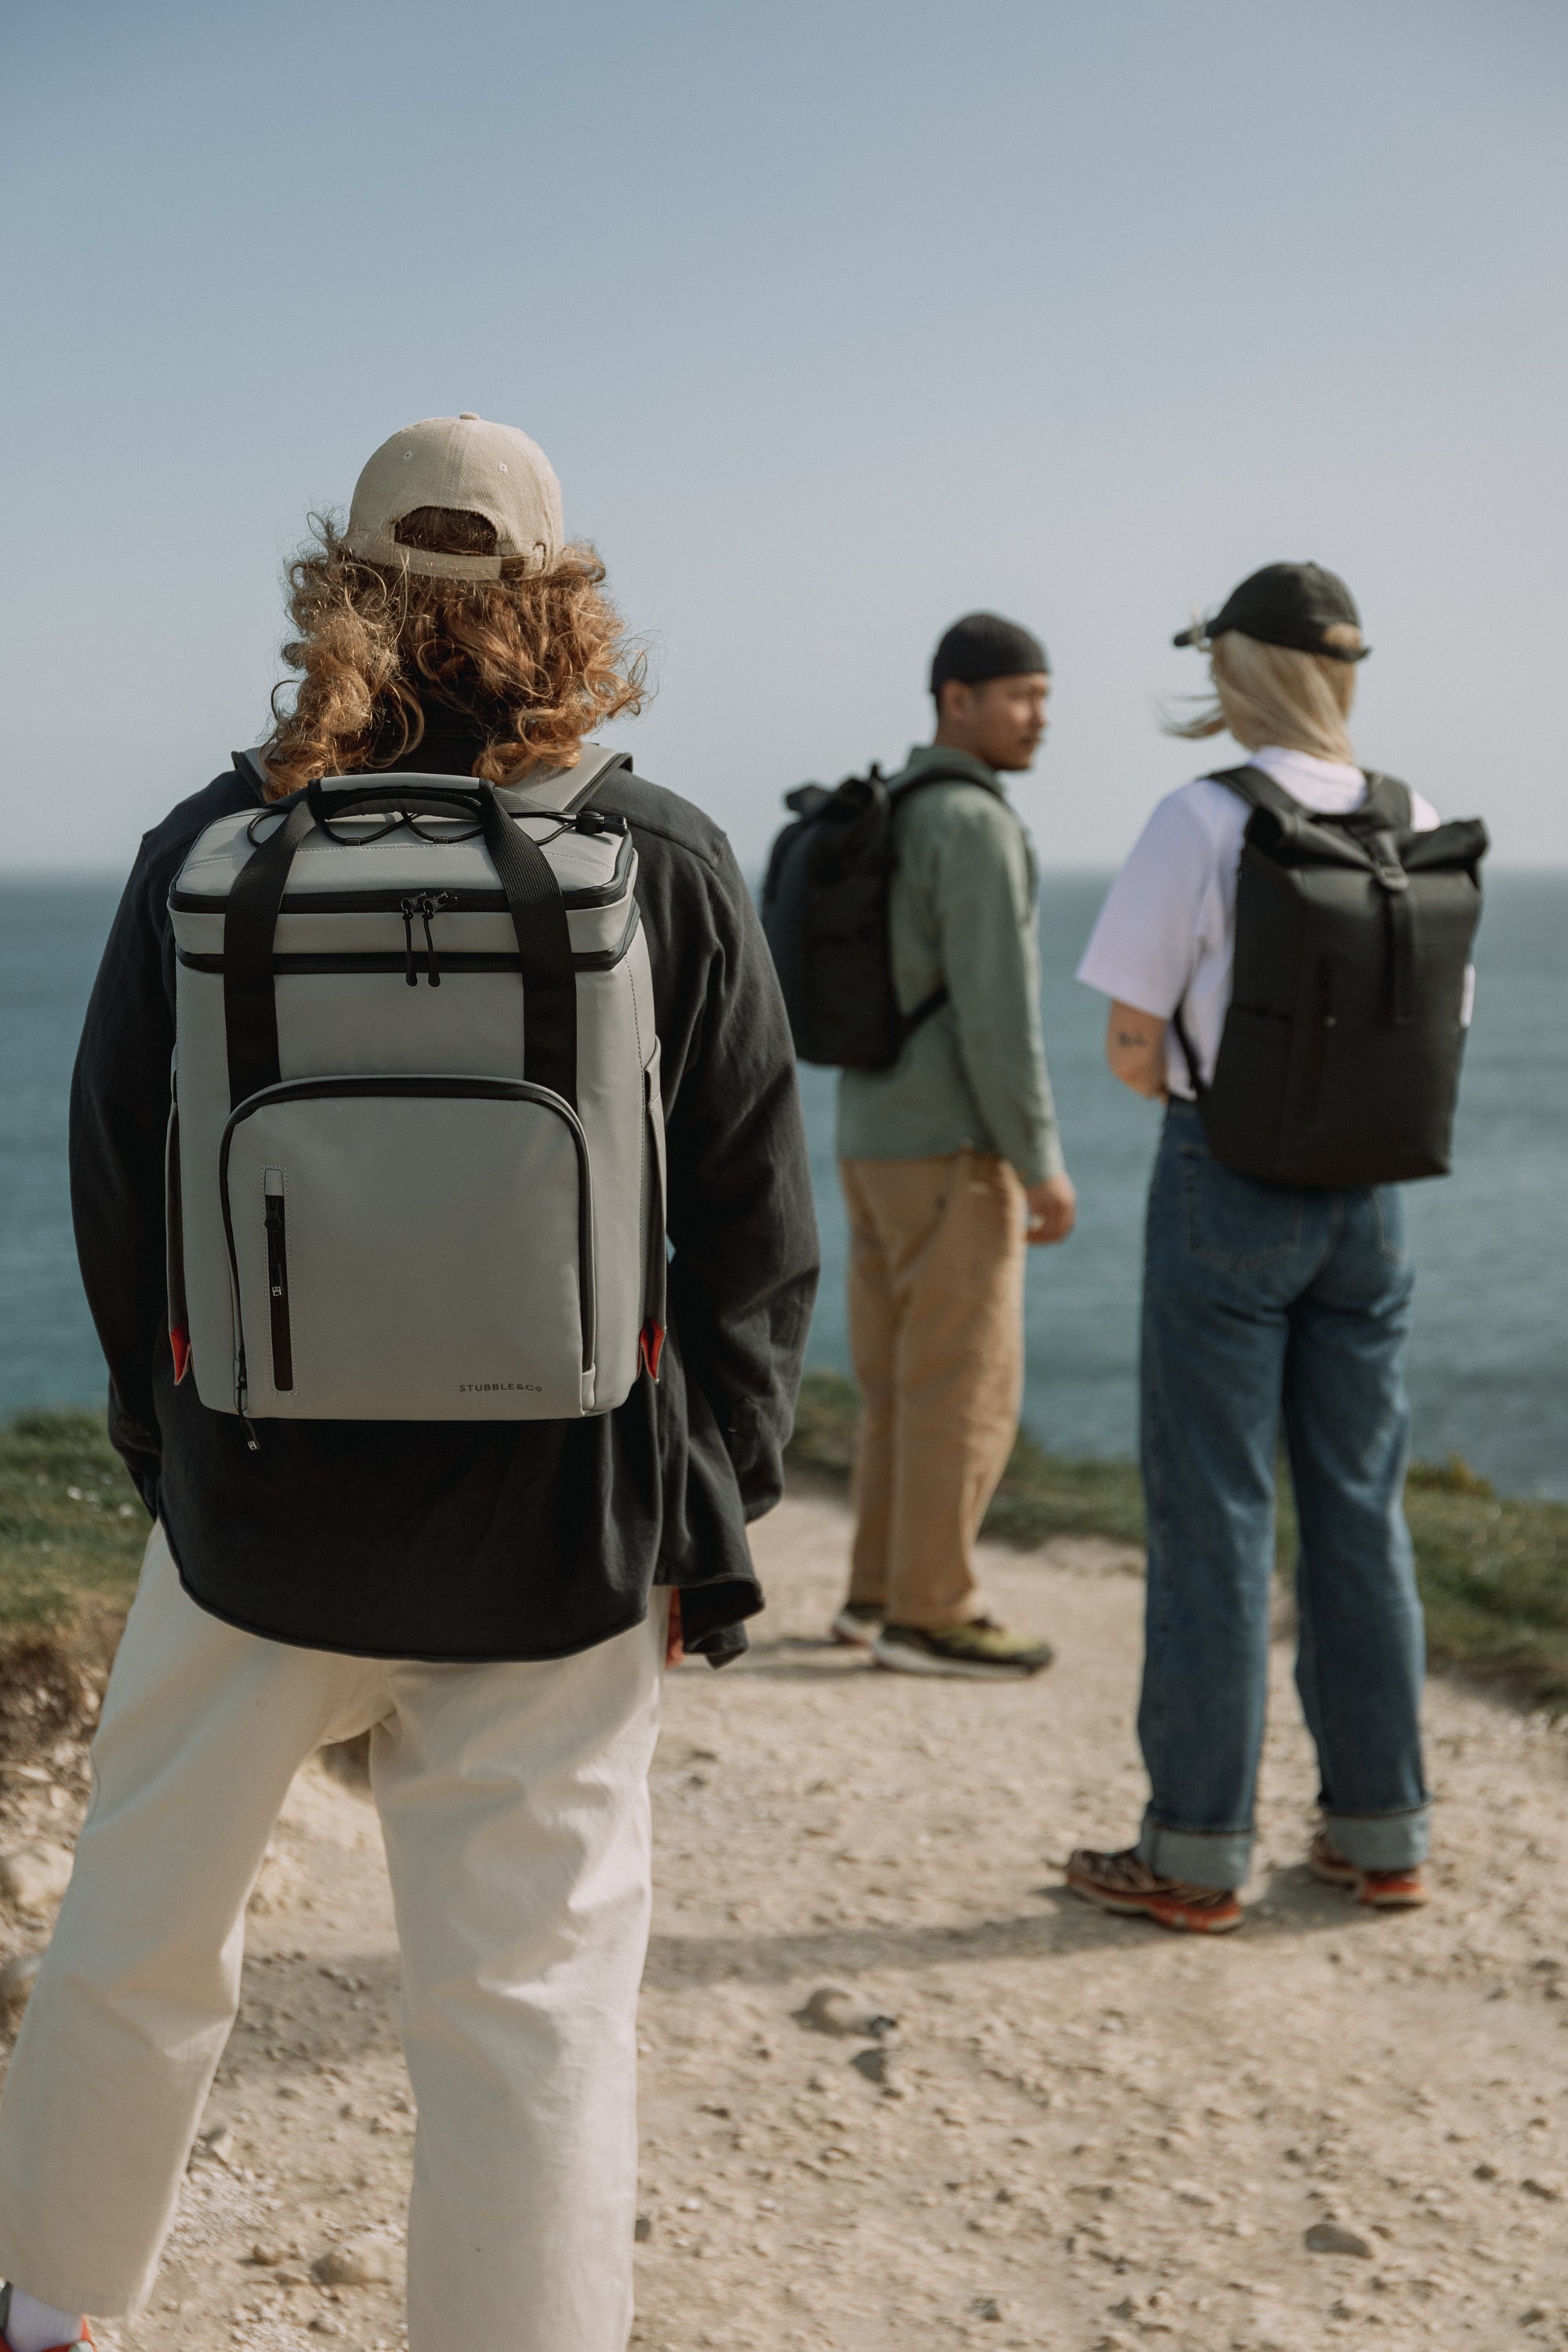 Group on a beach with The Cooler backpack